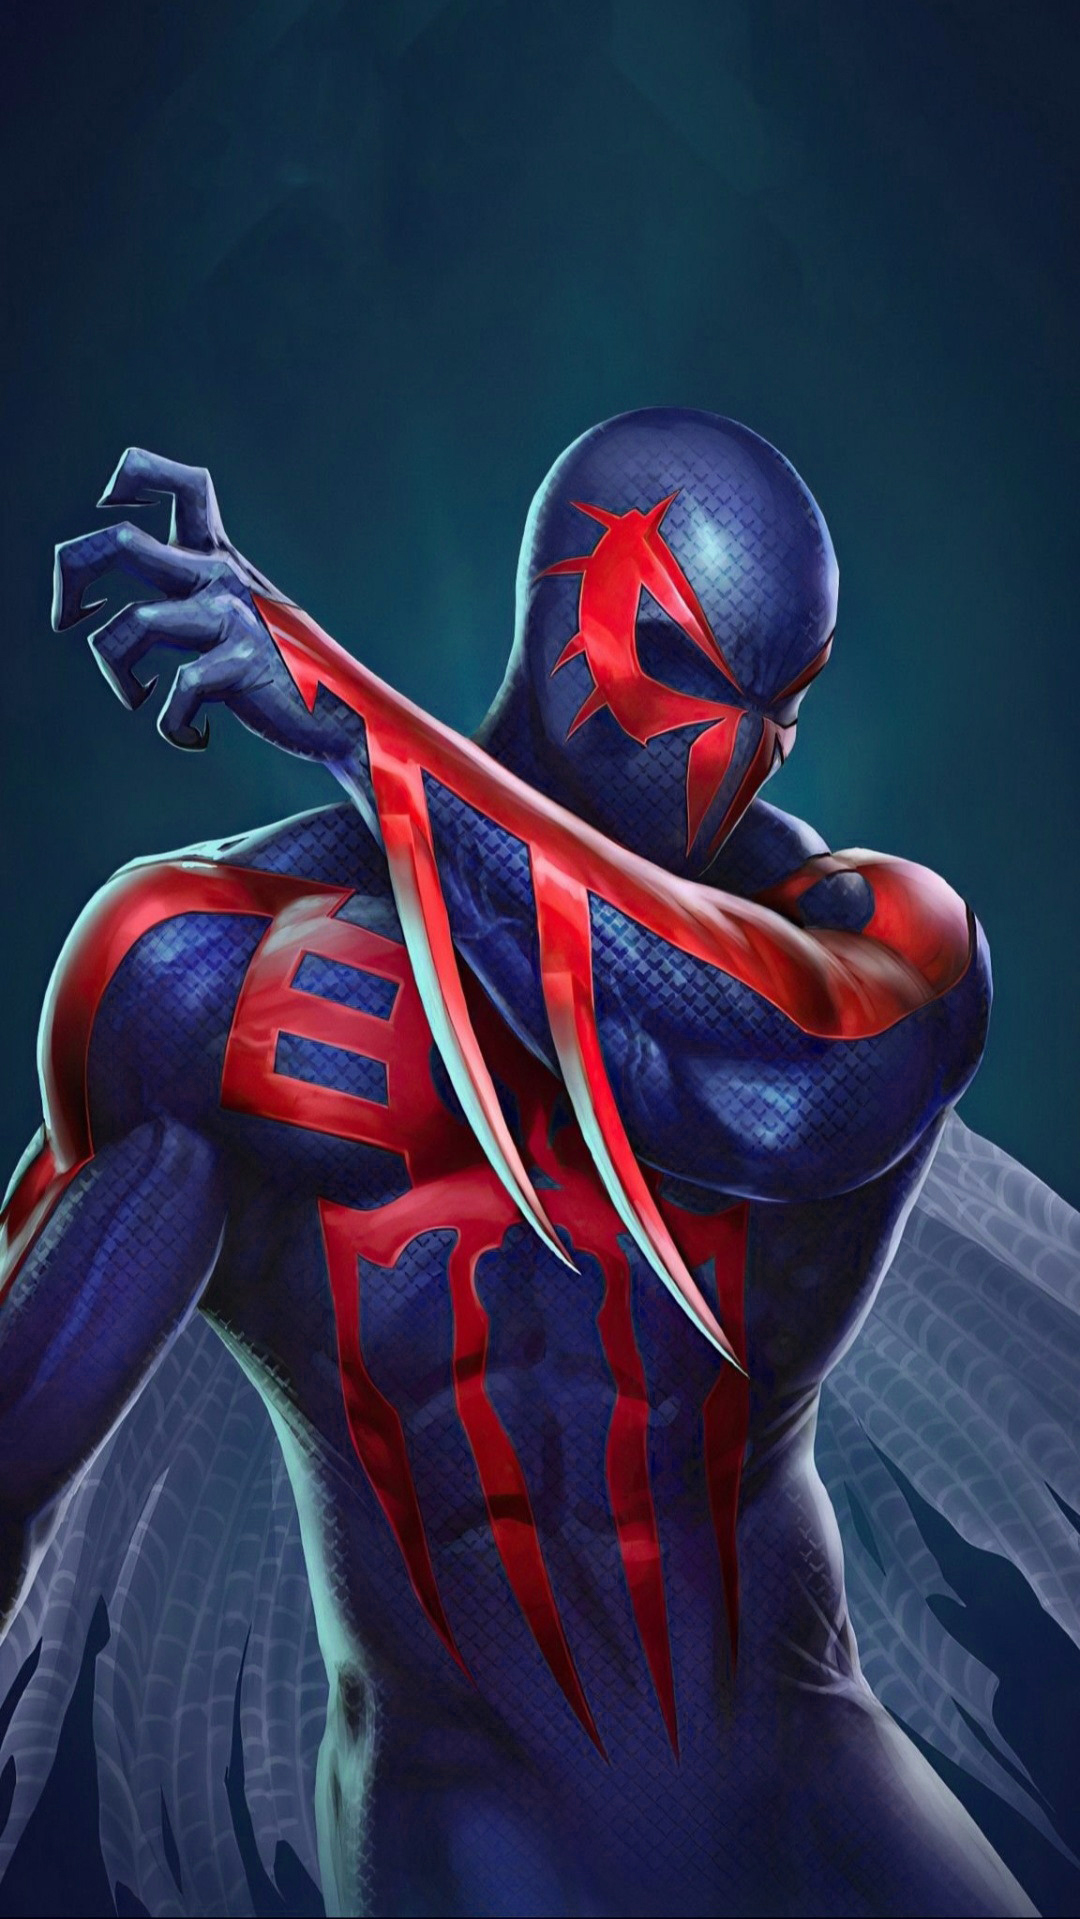 Spider Man 2099 Character Profile Wikia Fandom Powered By Wikia